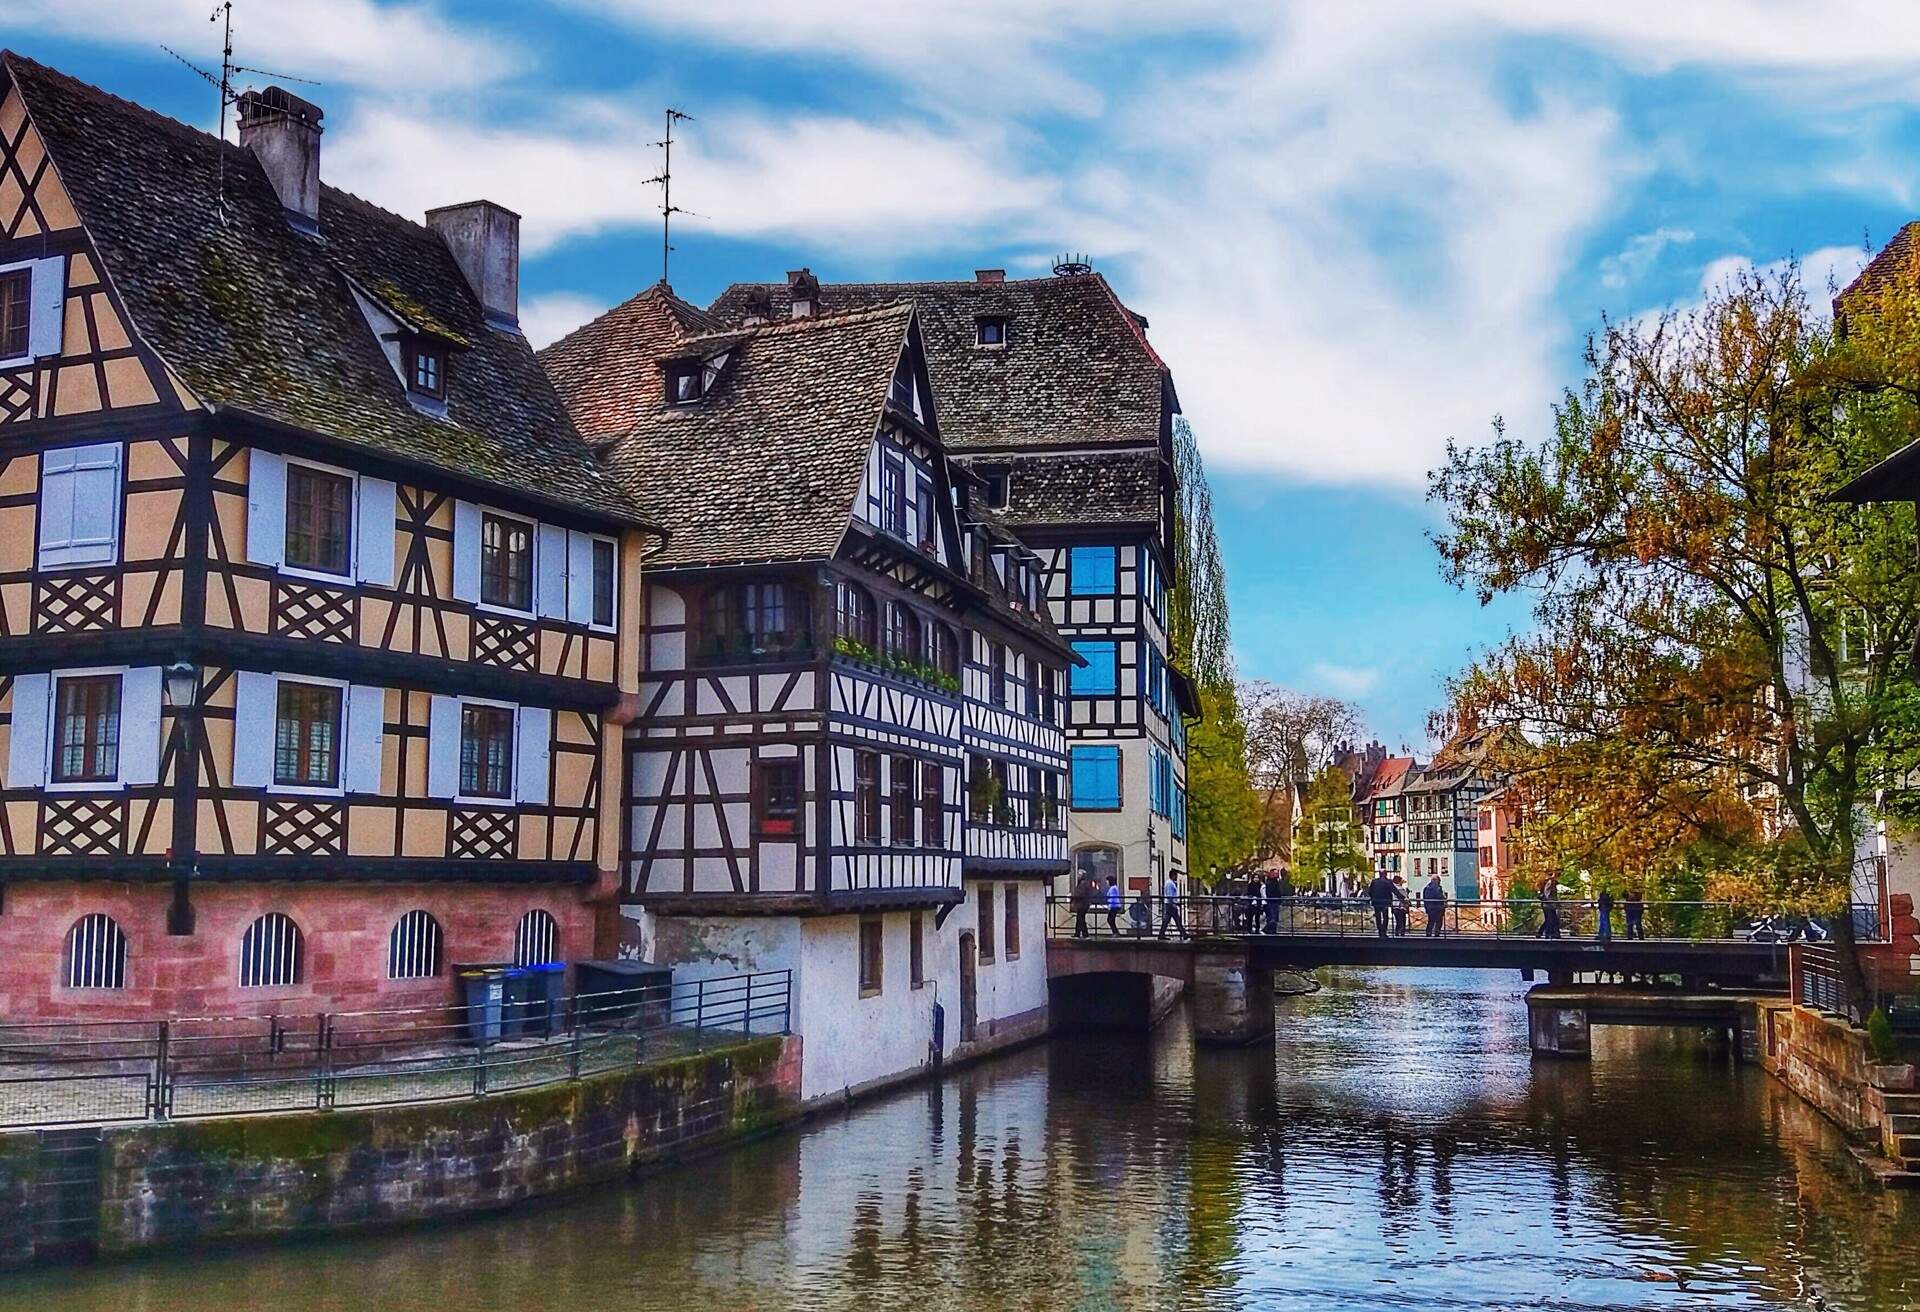 DEST_FRANCE_STRASBOURG_CANAL_AND_WOODEN-HOUSES